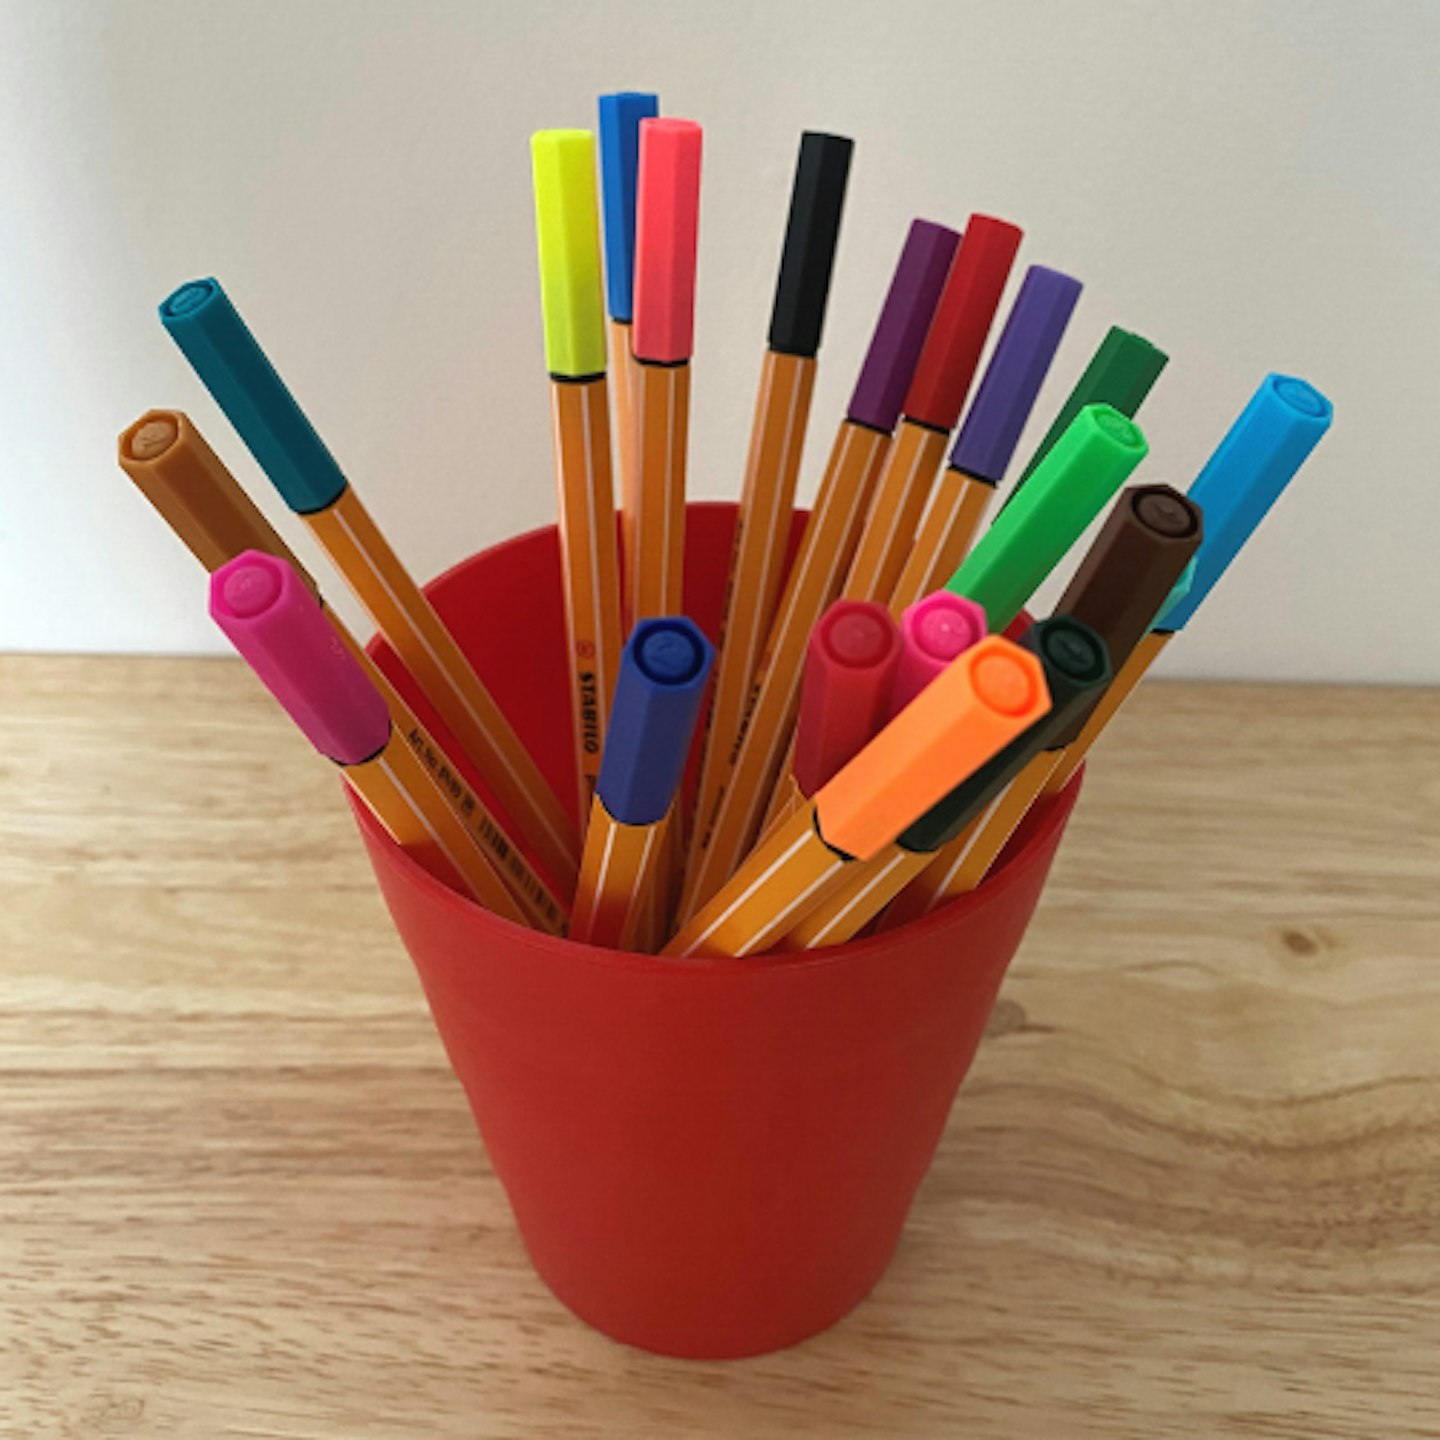 Multi-coloured pens in a red pot on a white background